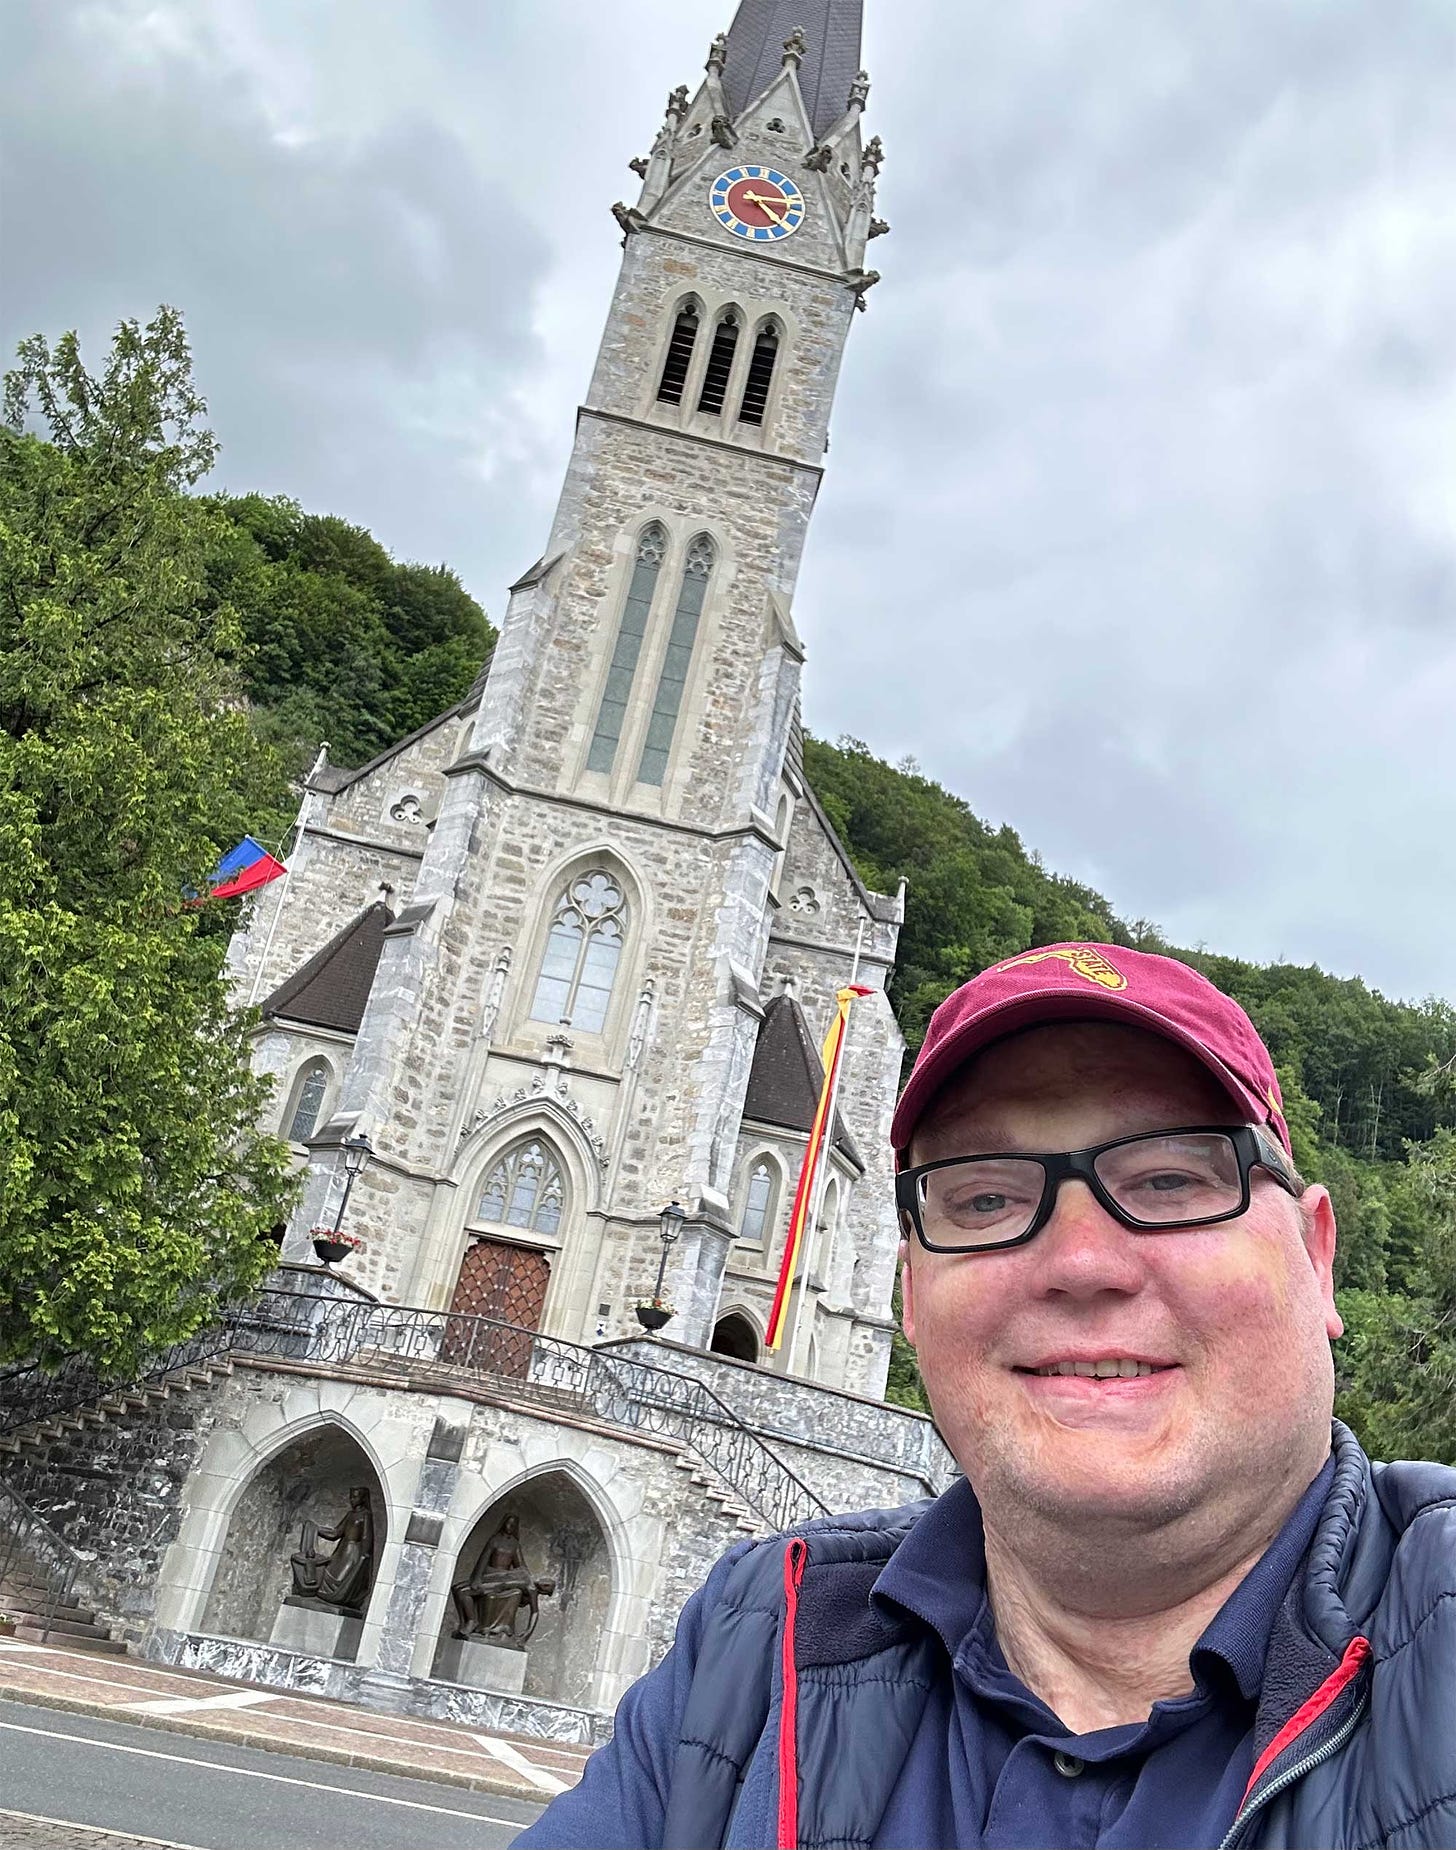 Selfie of John in front of cathedral with trees surrounding it.